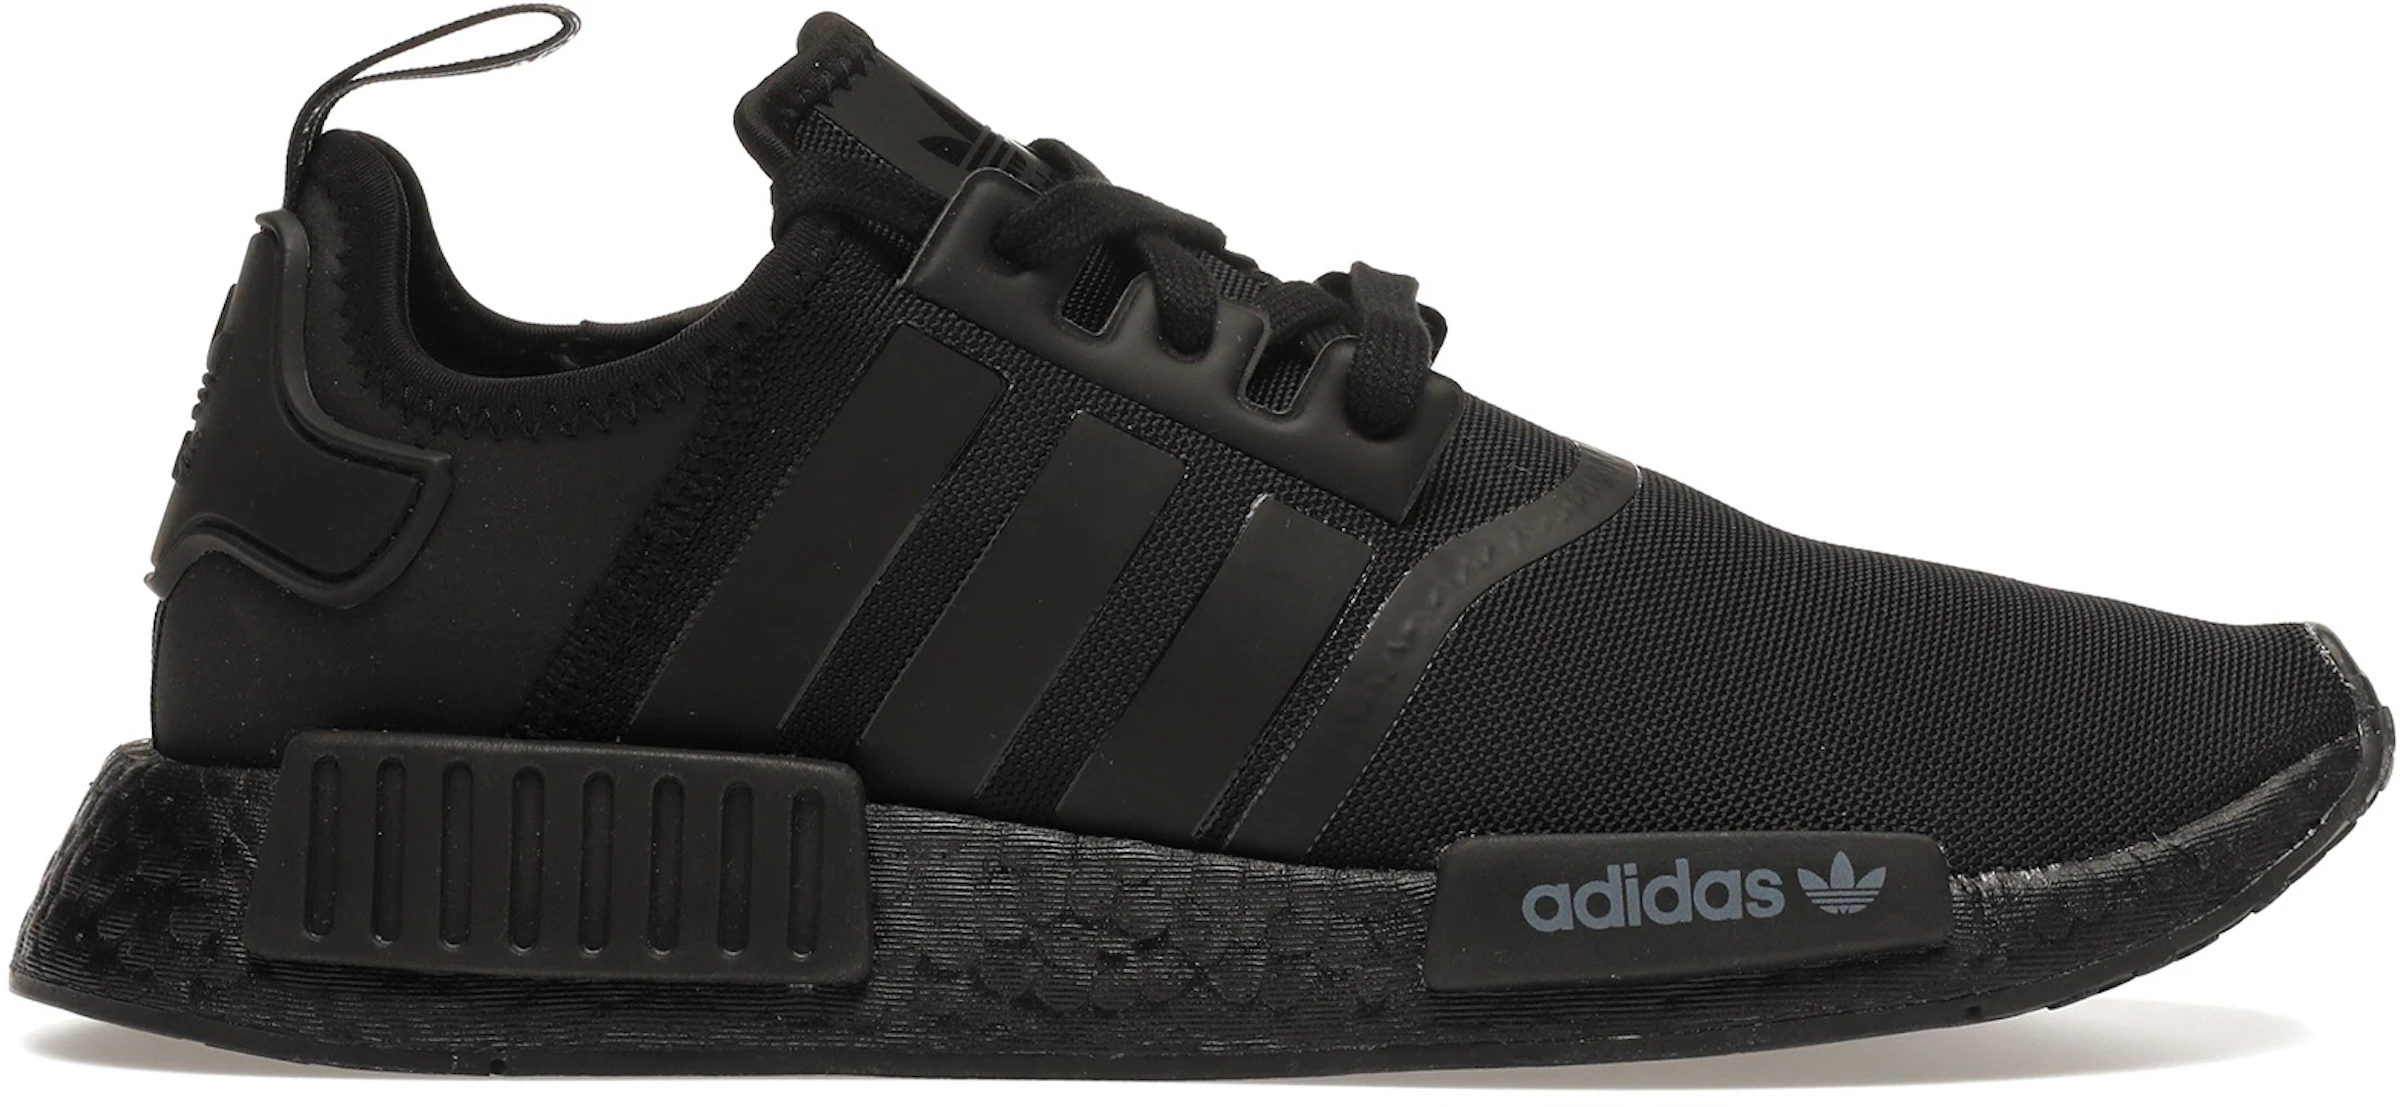 adidas - All Sizes & Colorways at StockX